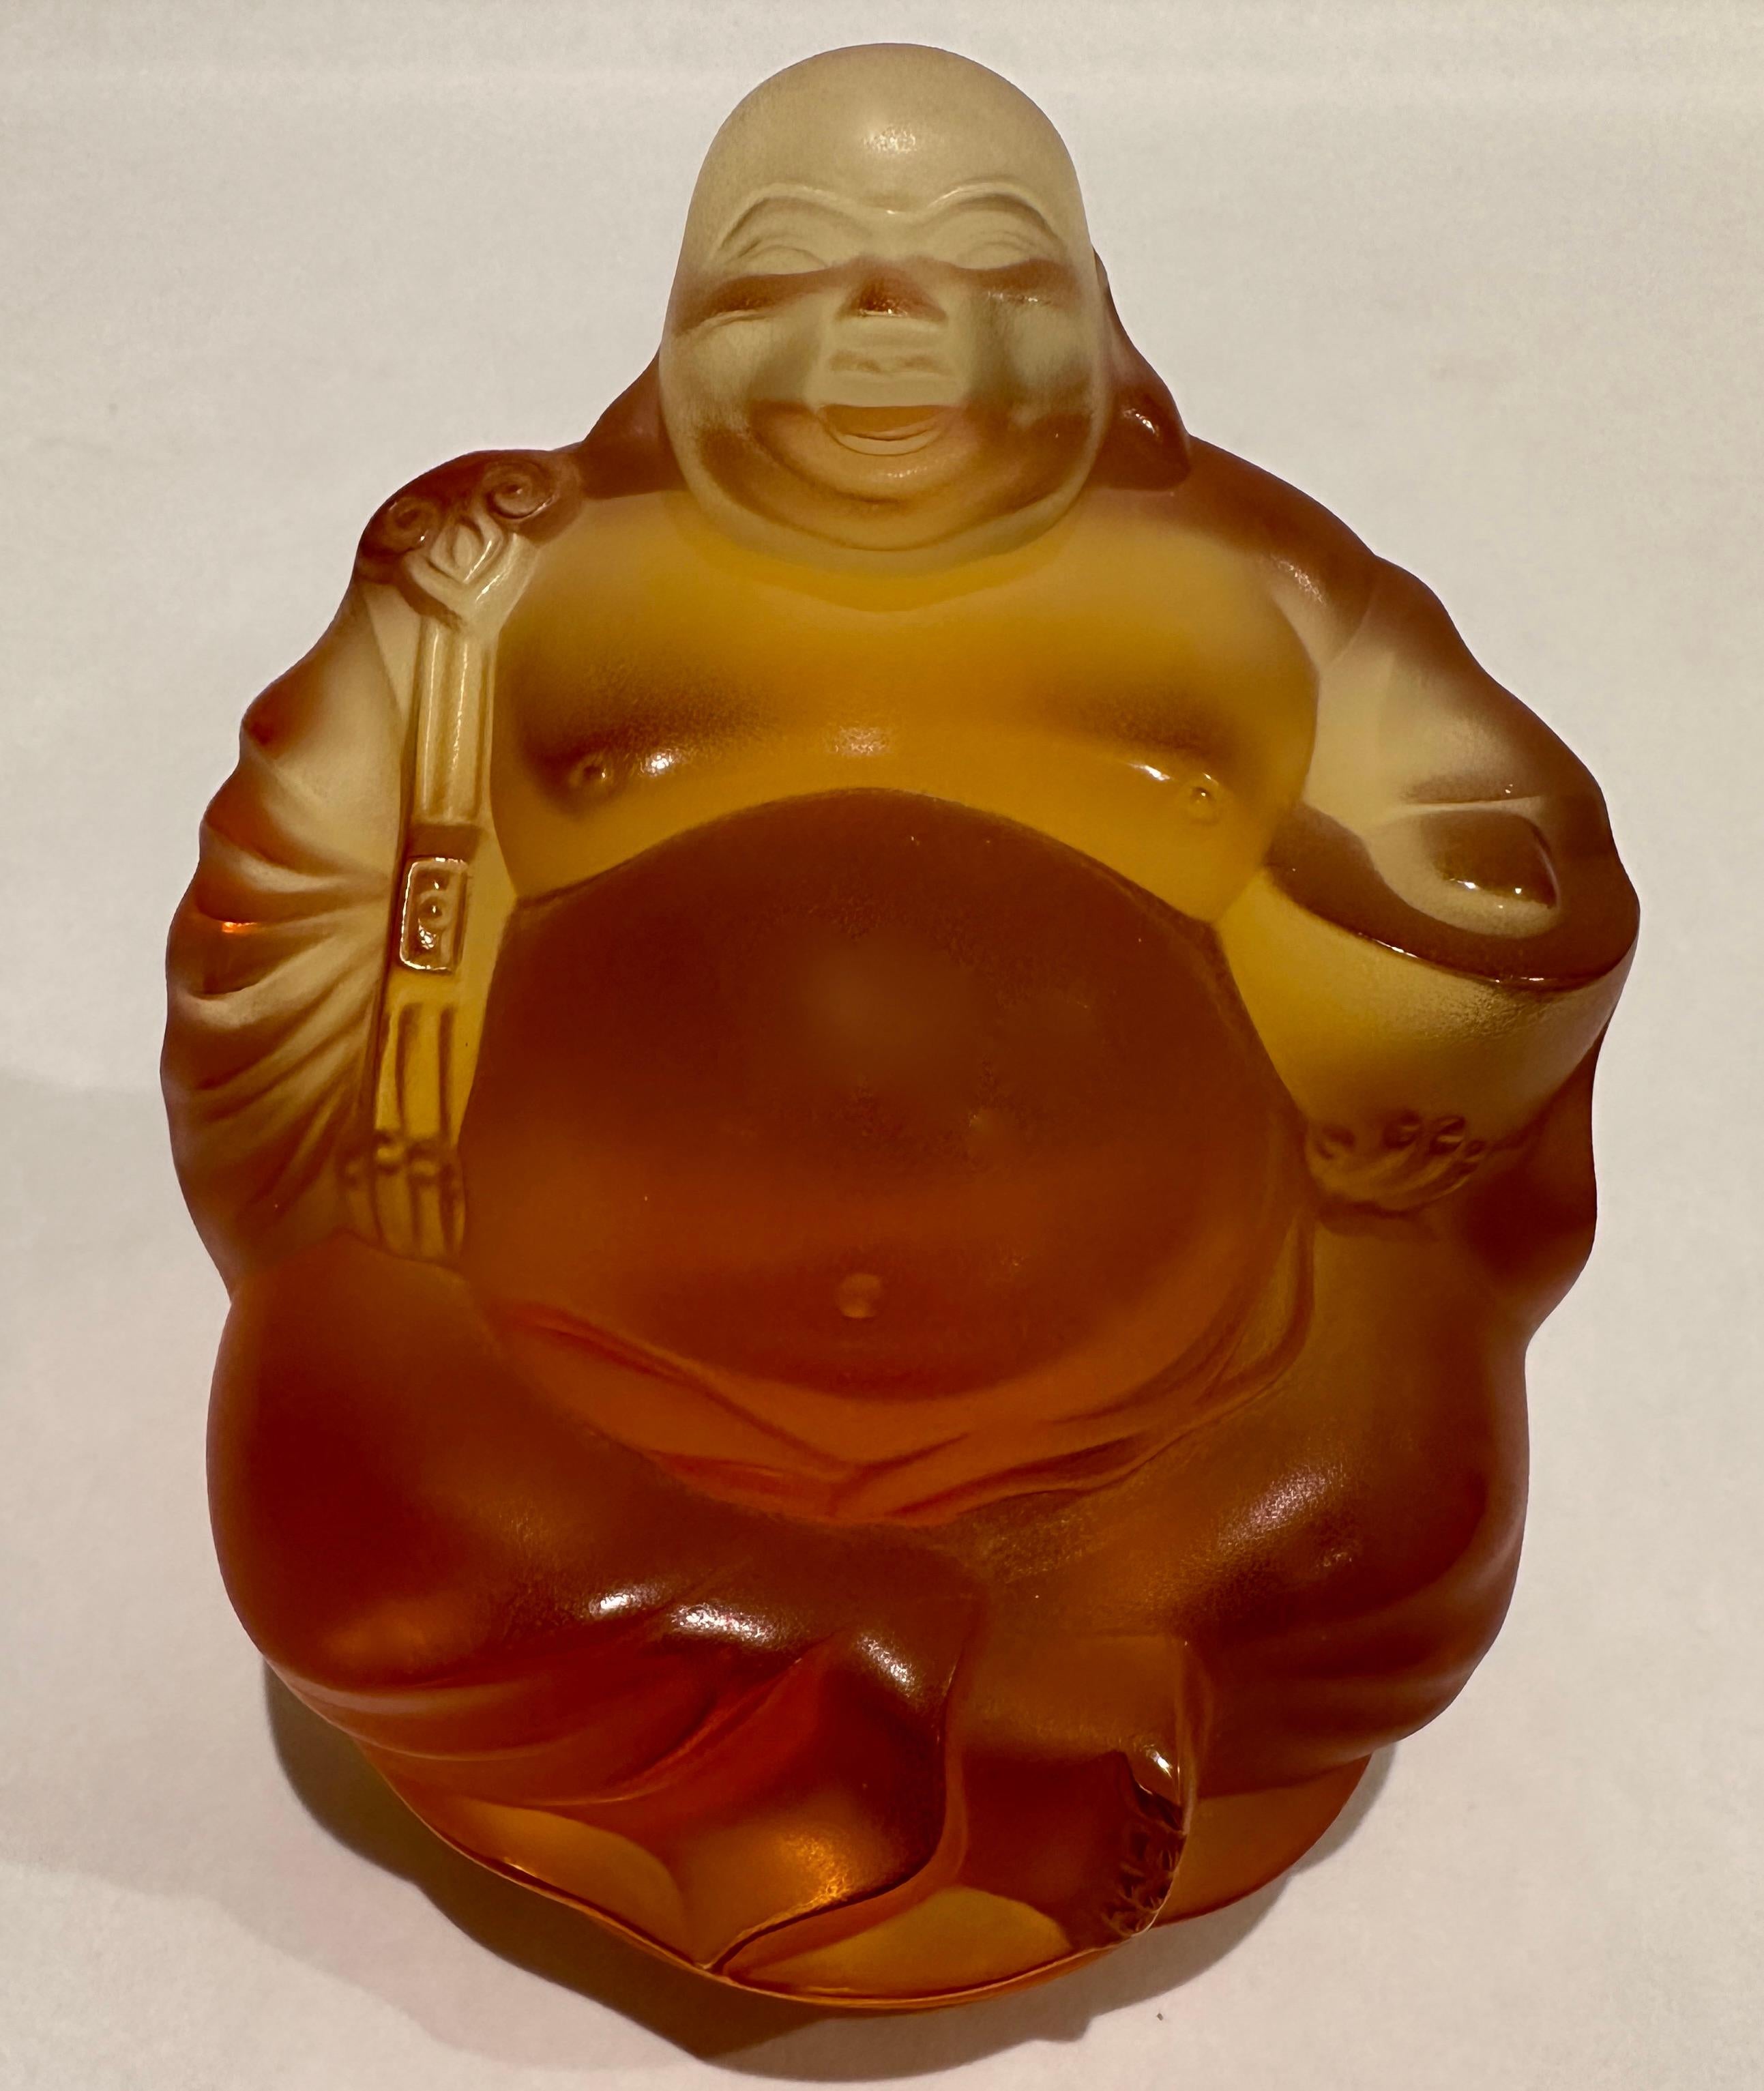 A Lalique limited edition amber glass model of a seated 'Happy Buddha', numbered 809/888.